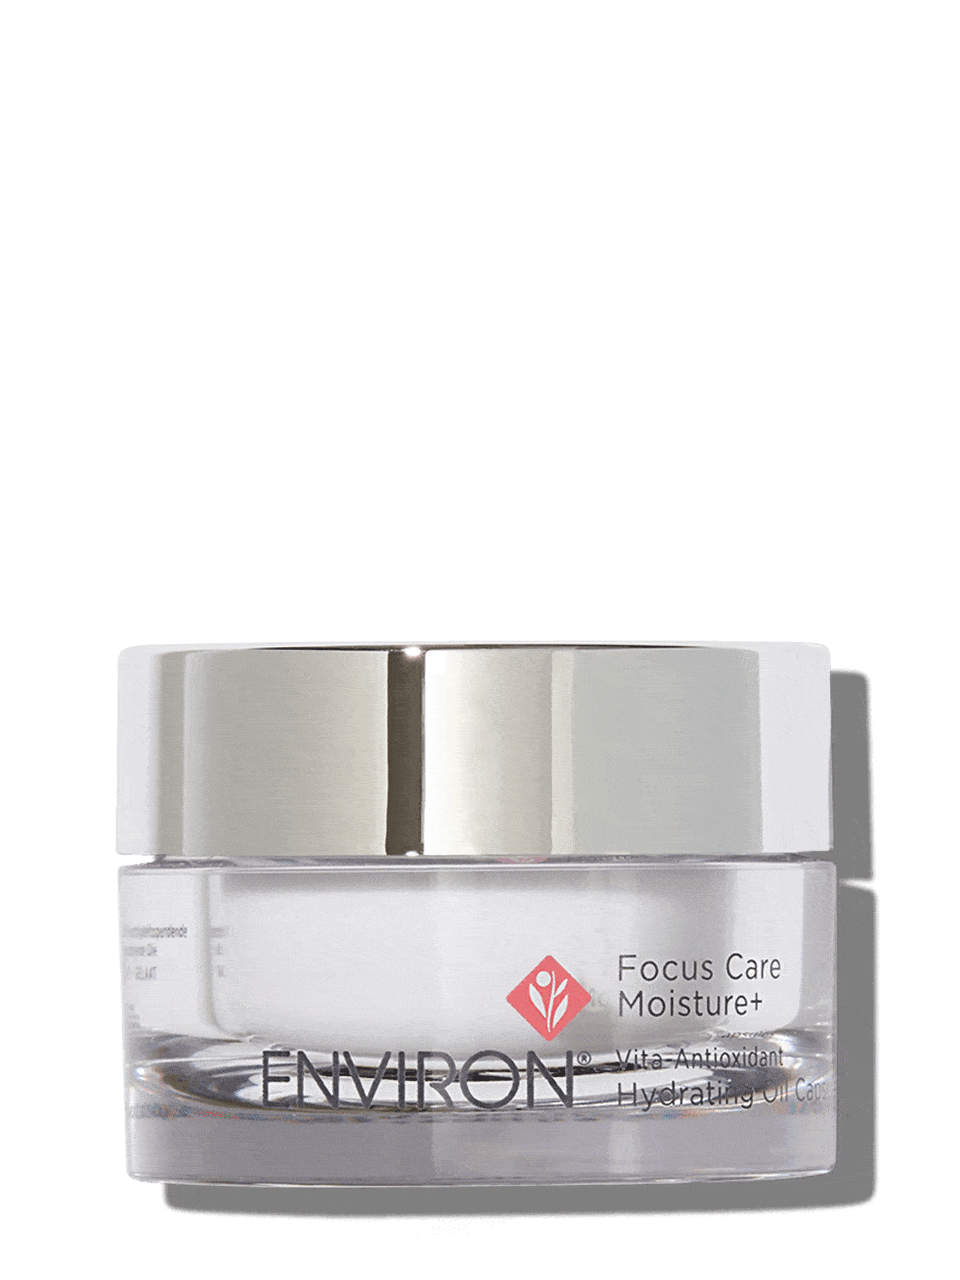 Hydrating Oil Capsules for Face SKINCARE Environ 